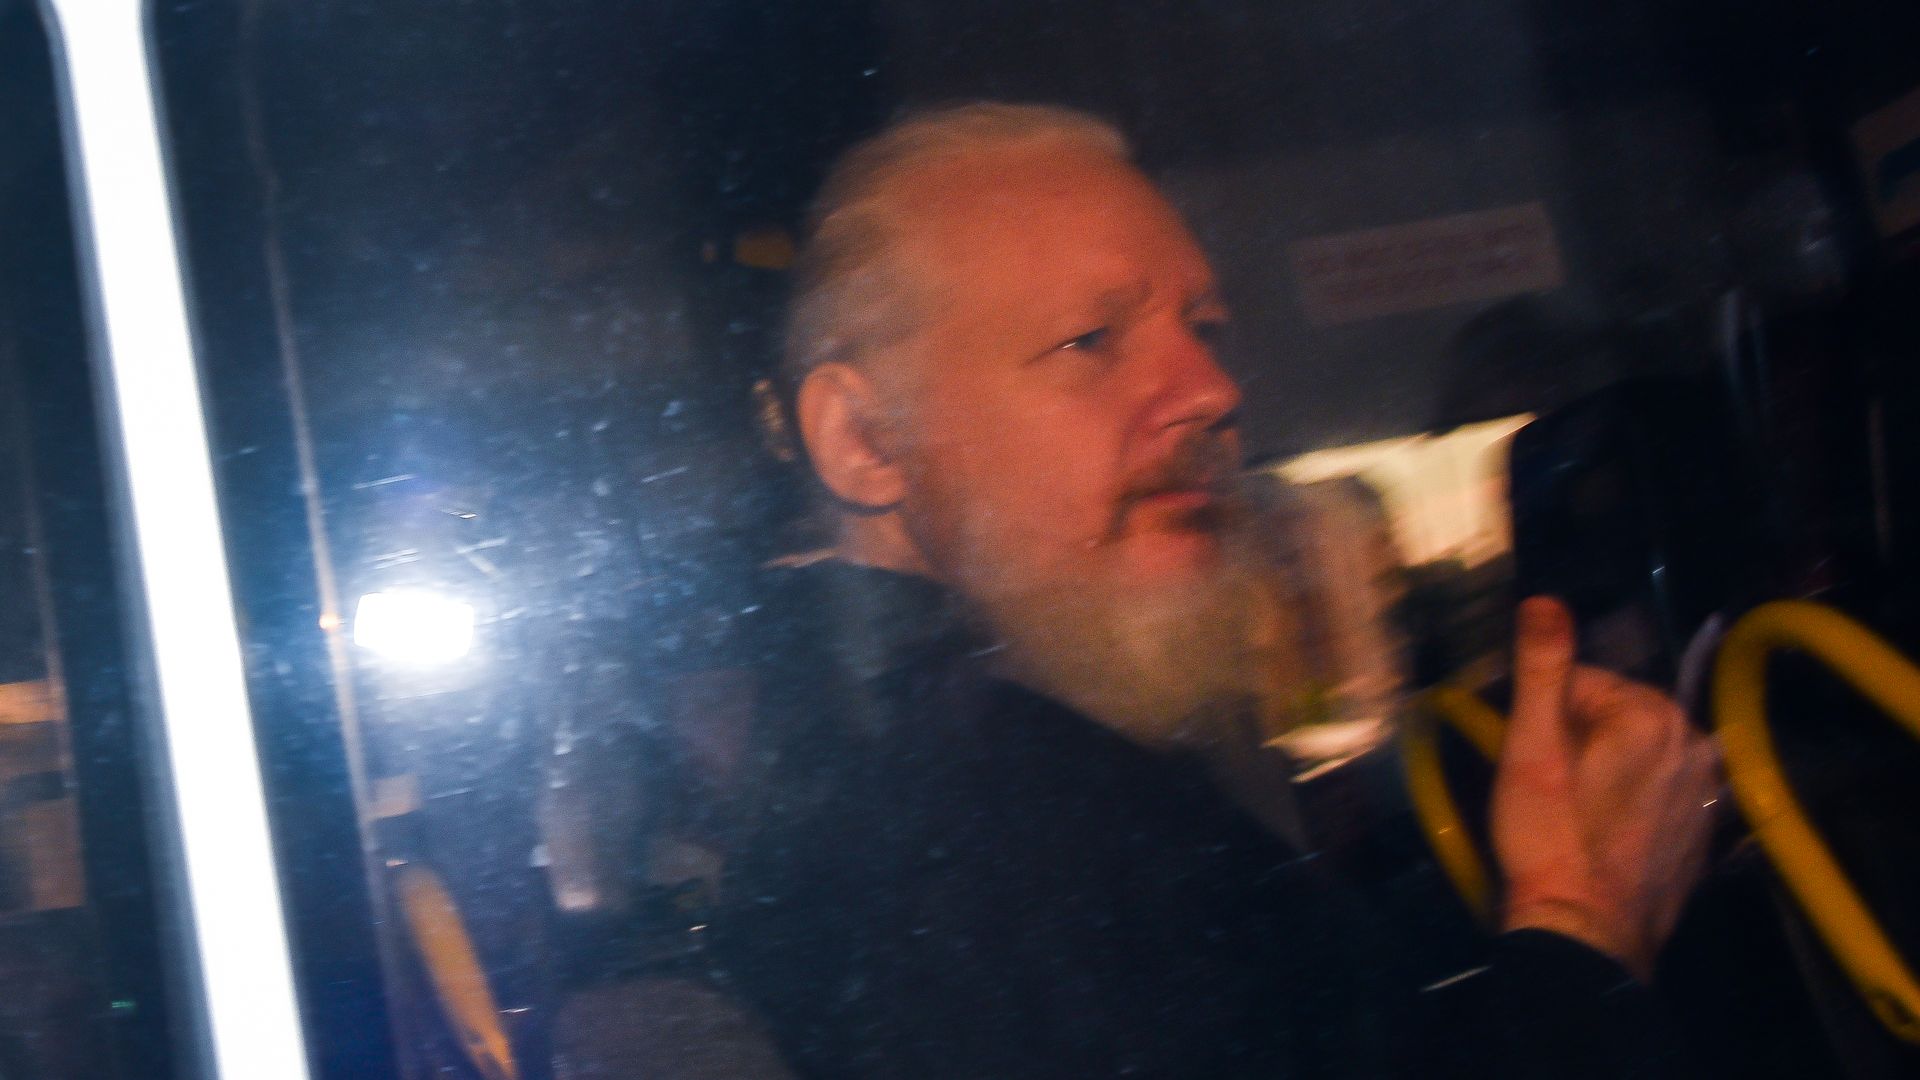  Wikileaks founder Julian Assange makes his way into the Westminster Magistrates Court after being arrested this morning by Metropolitan Police, on behalf of US authorities, London on April 11.